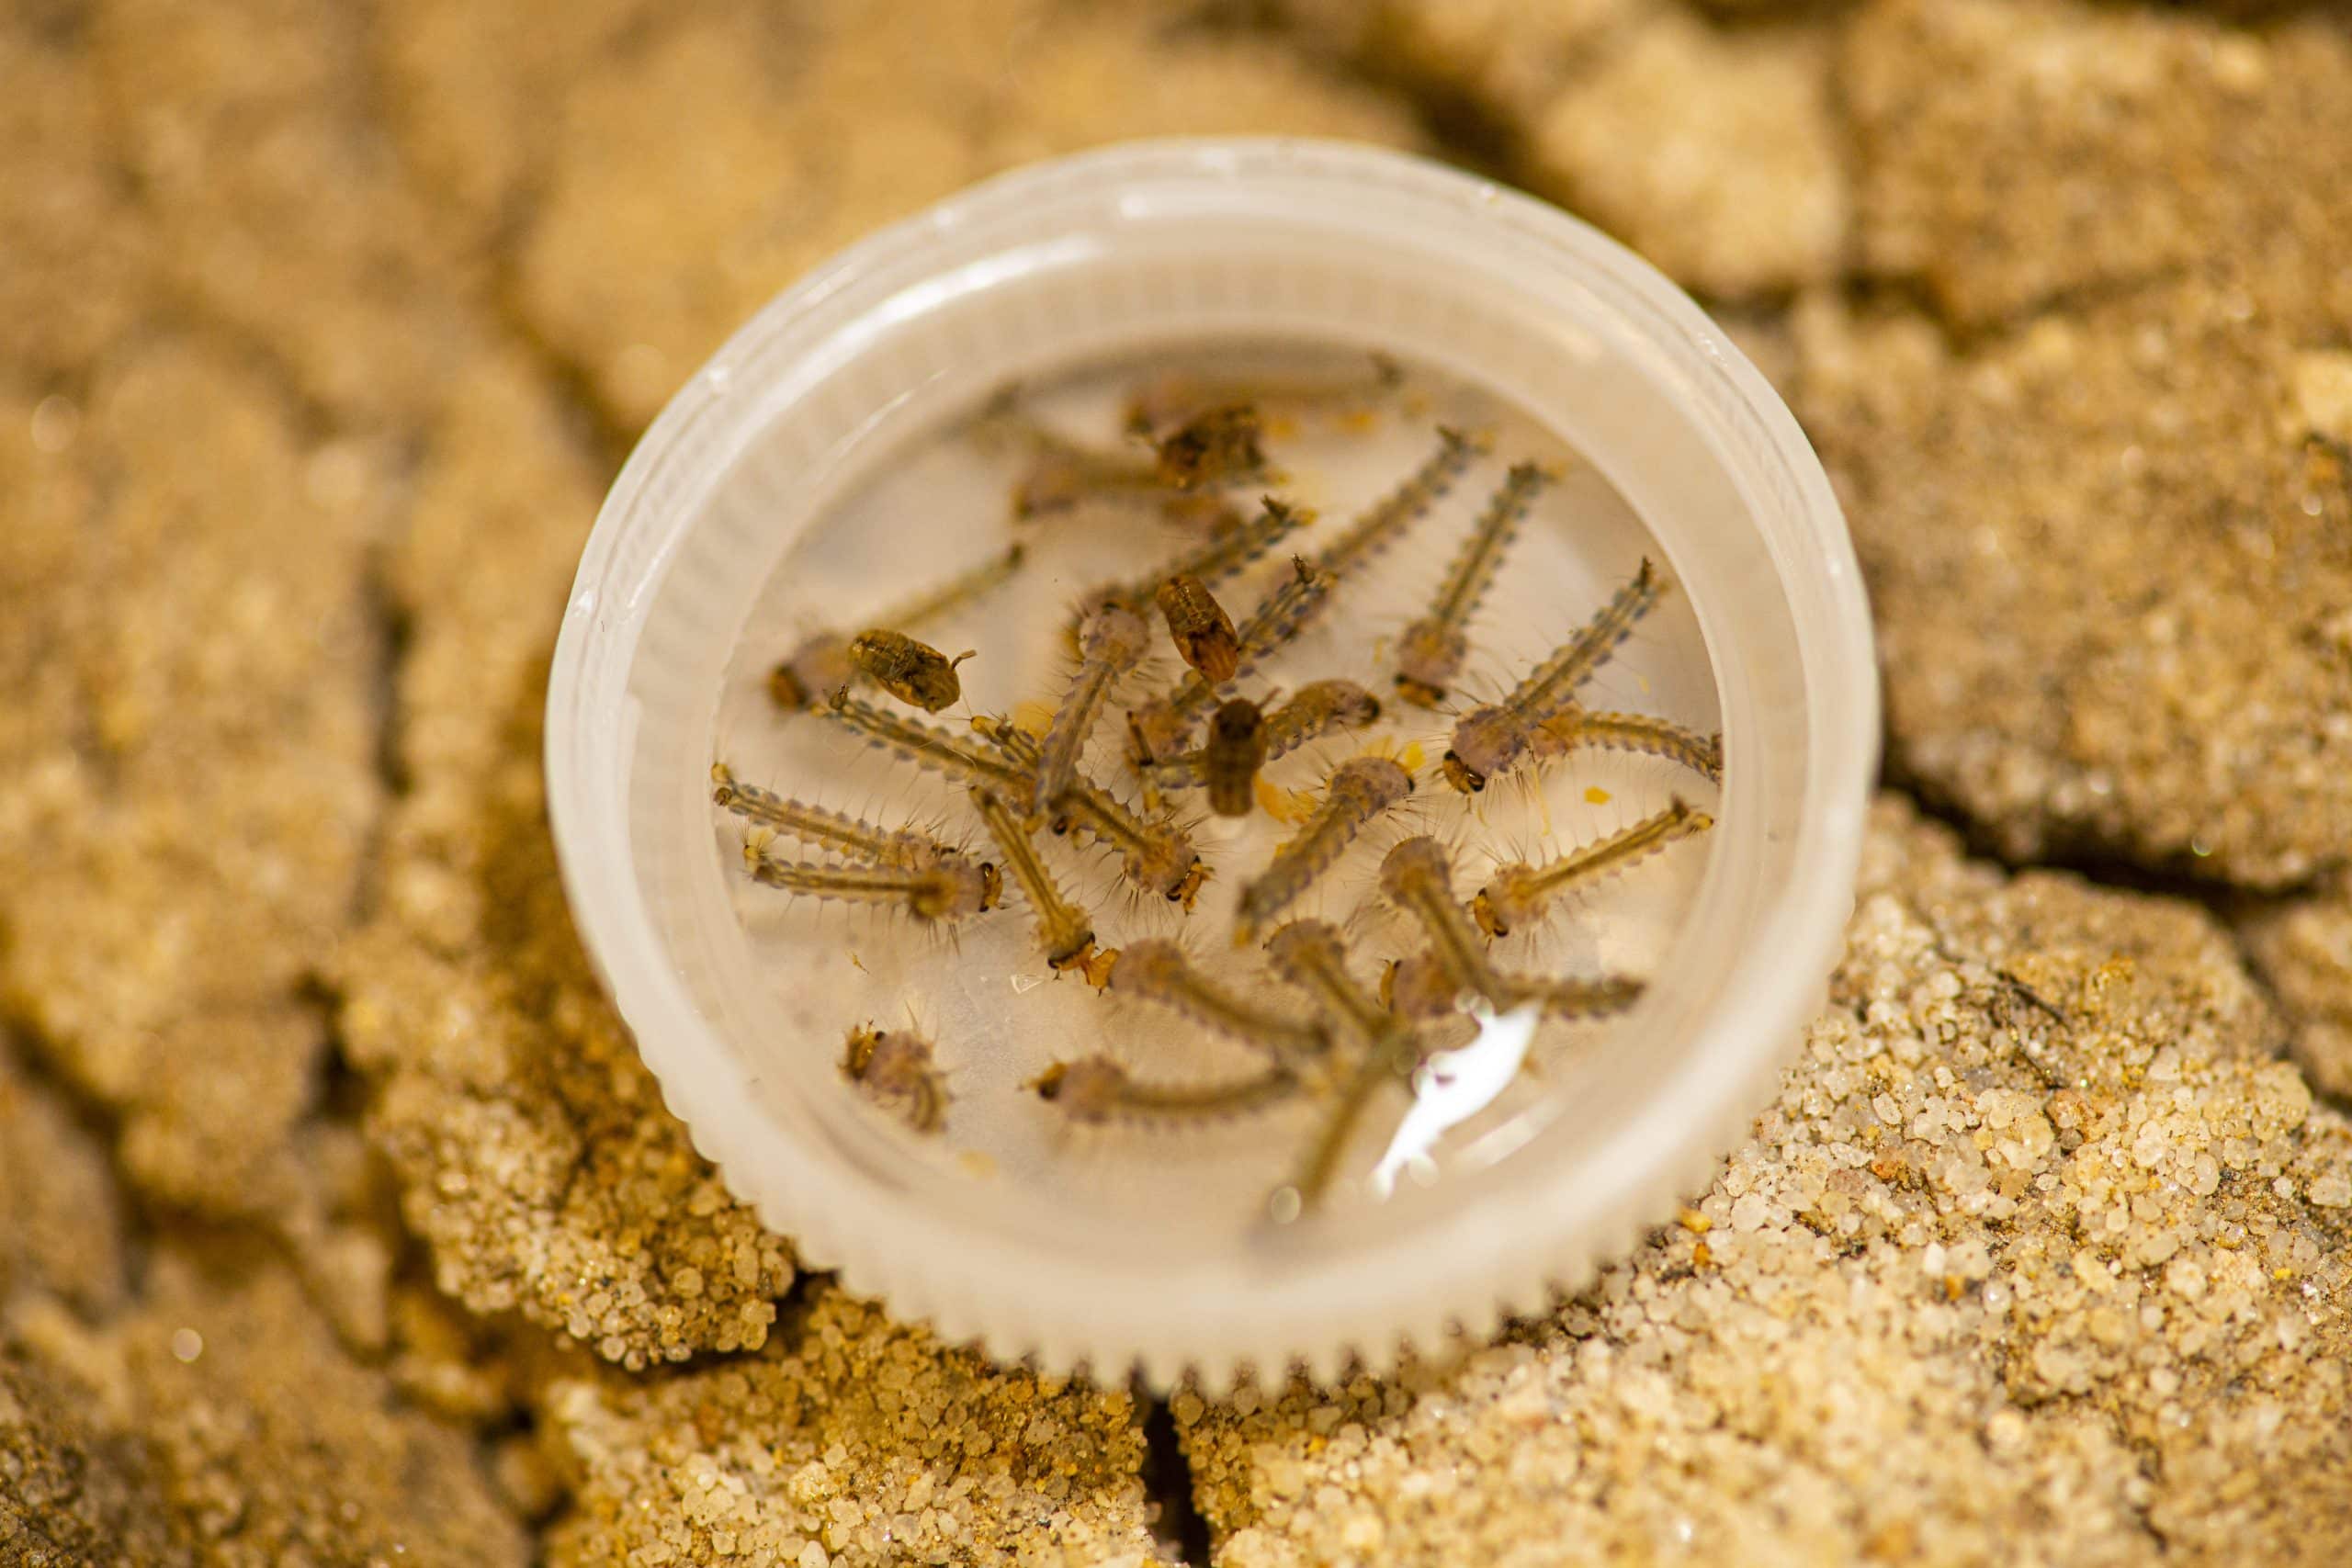 Mosquito larvae in stagnant water in a bottle cap